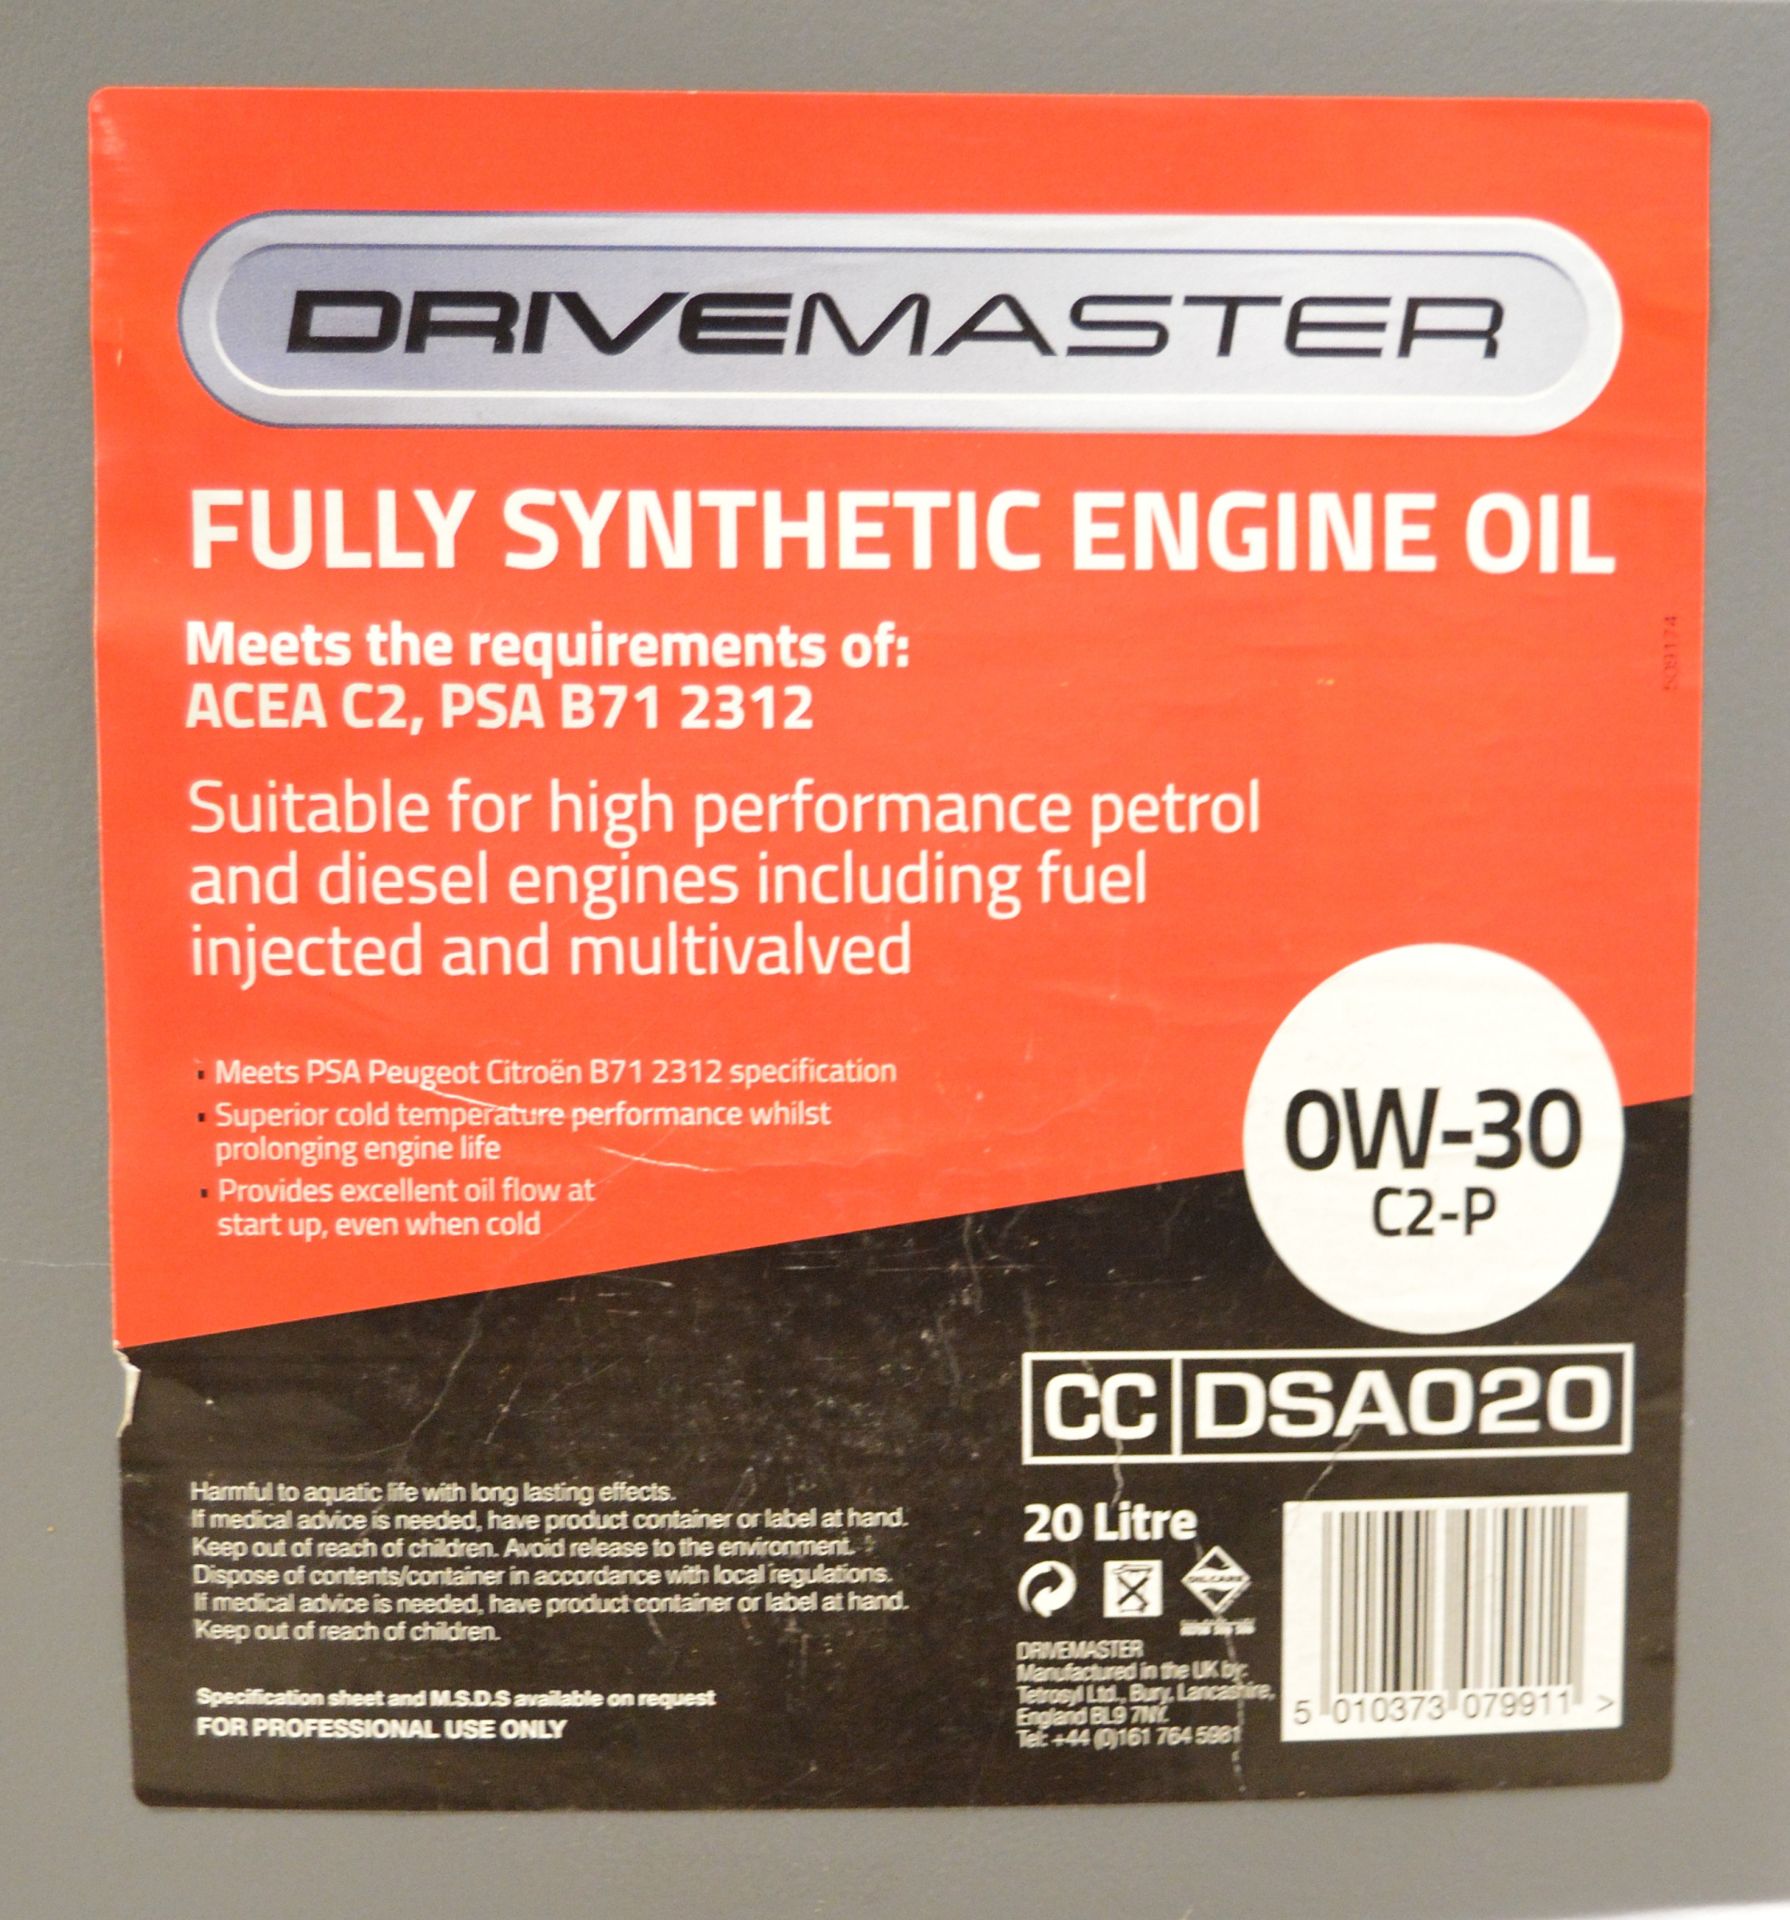 Drivemaster fully synthetic 0W-30 Engine Oil - 20L - Image 2 of 2